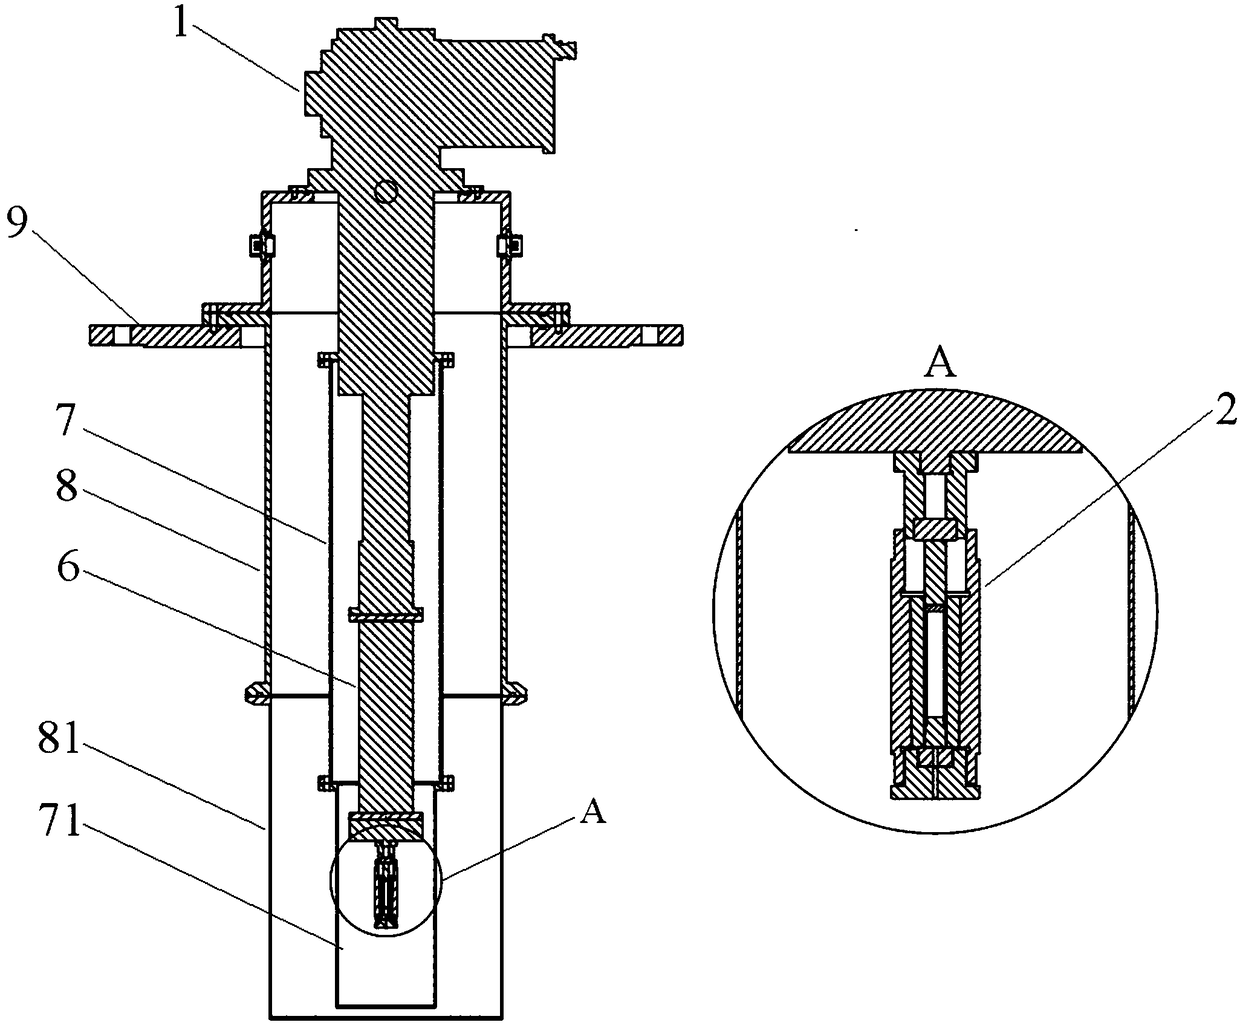 Sample environment coupling loading device for neutron scattering